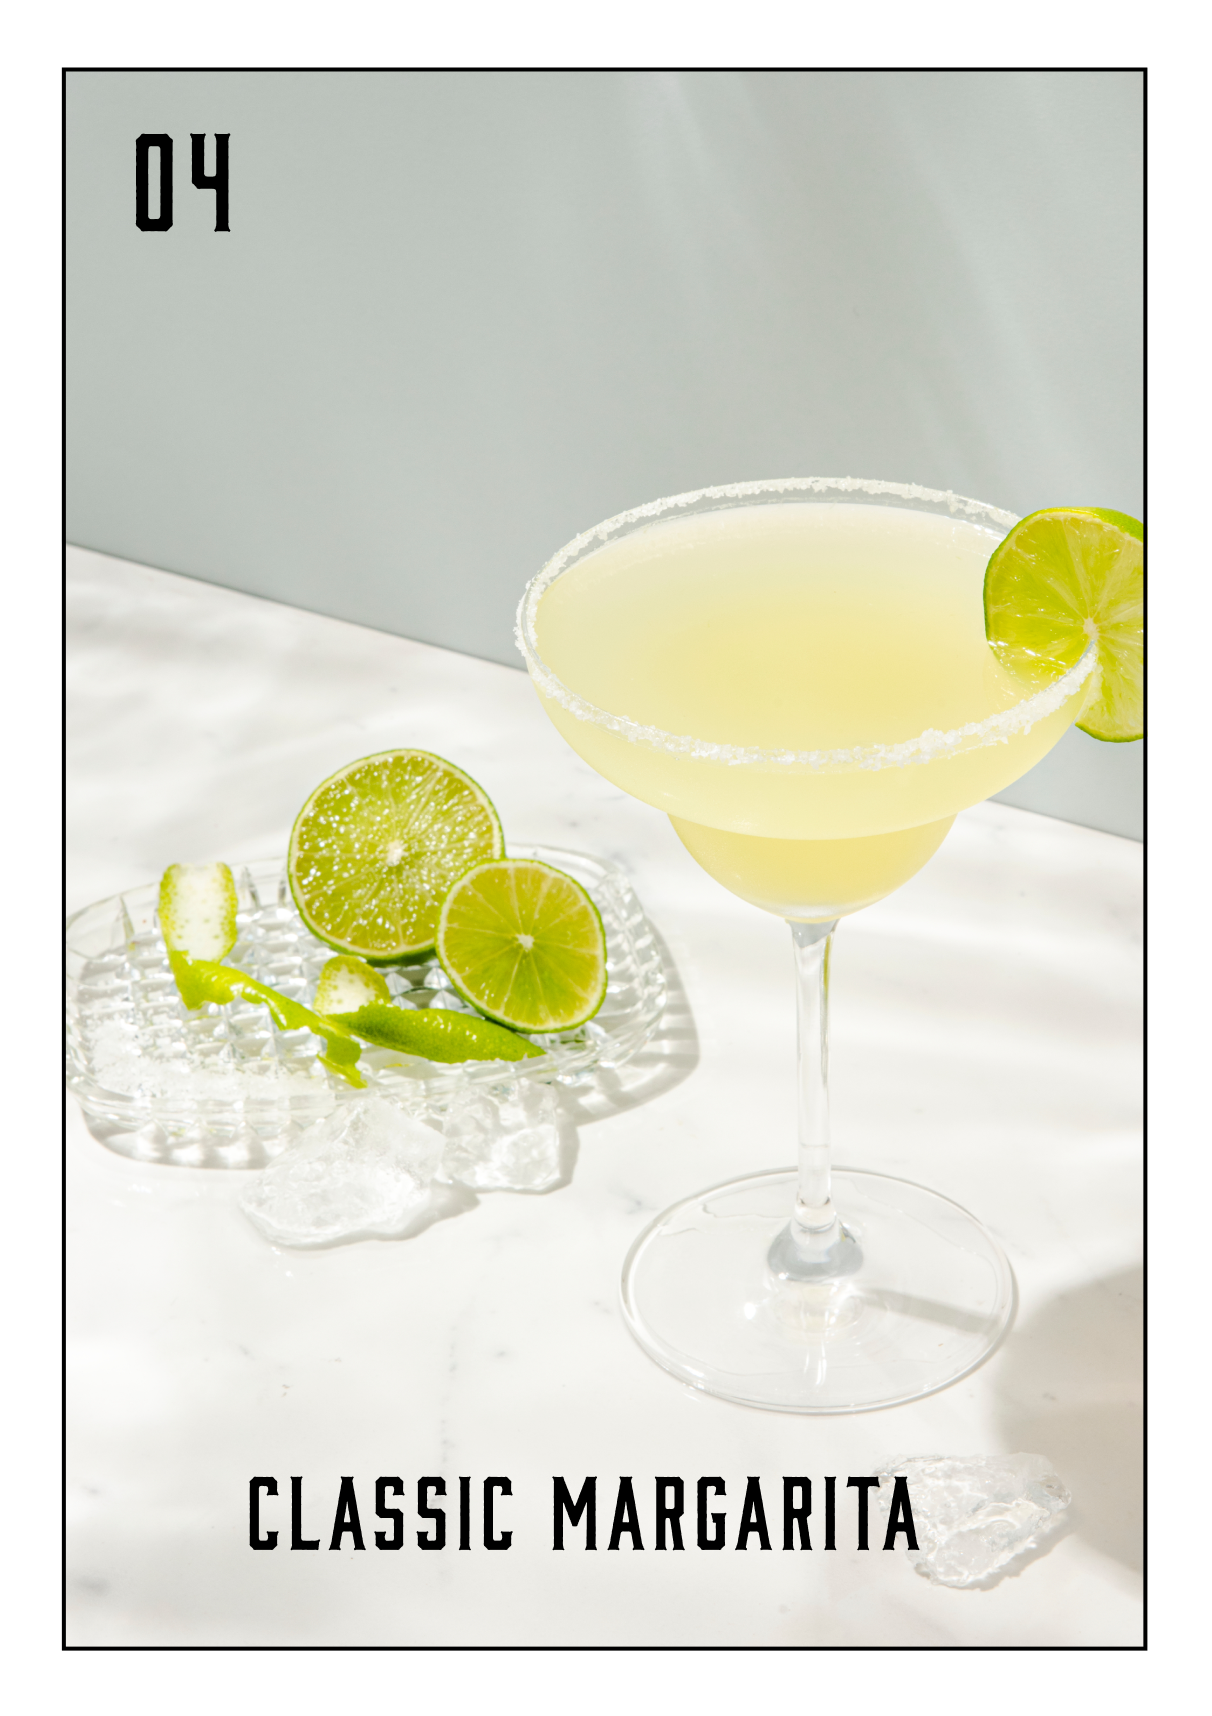 Classic Margarita Cocktail Made with Divirtido Tequila